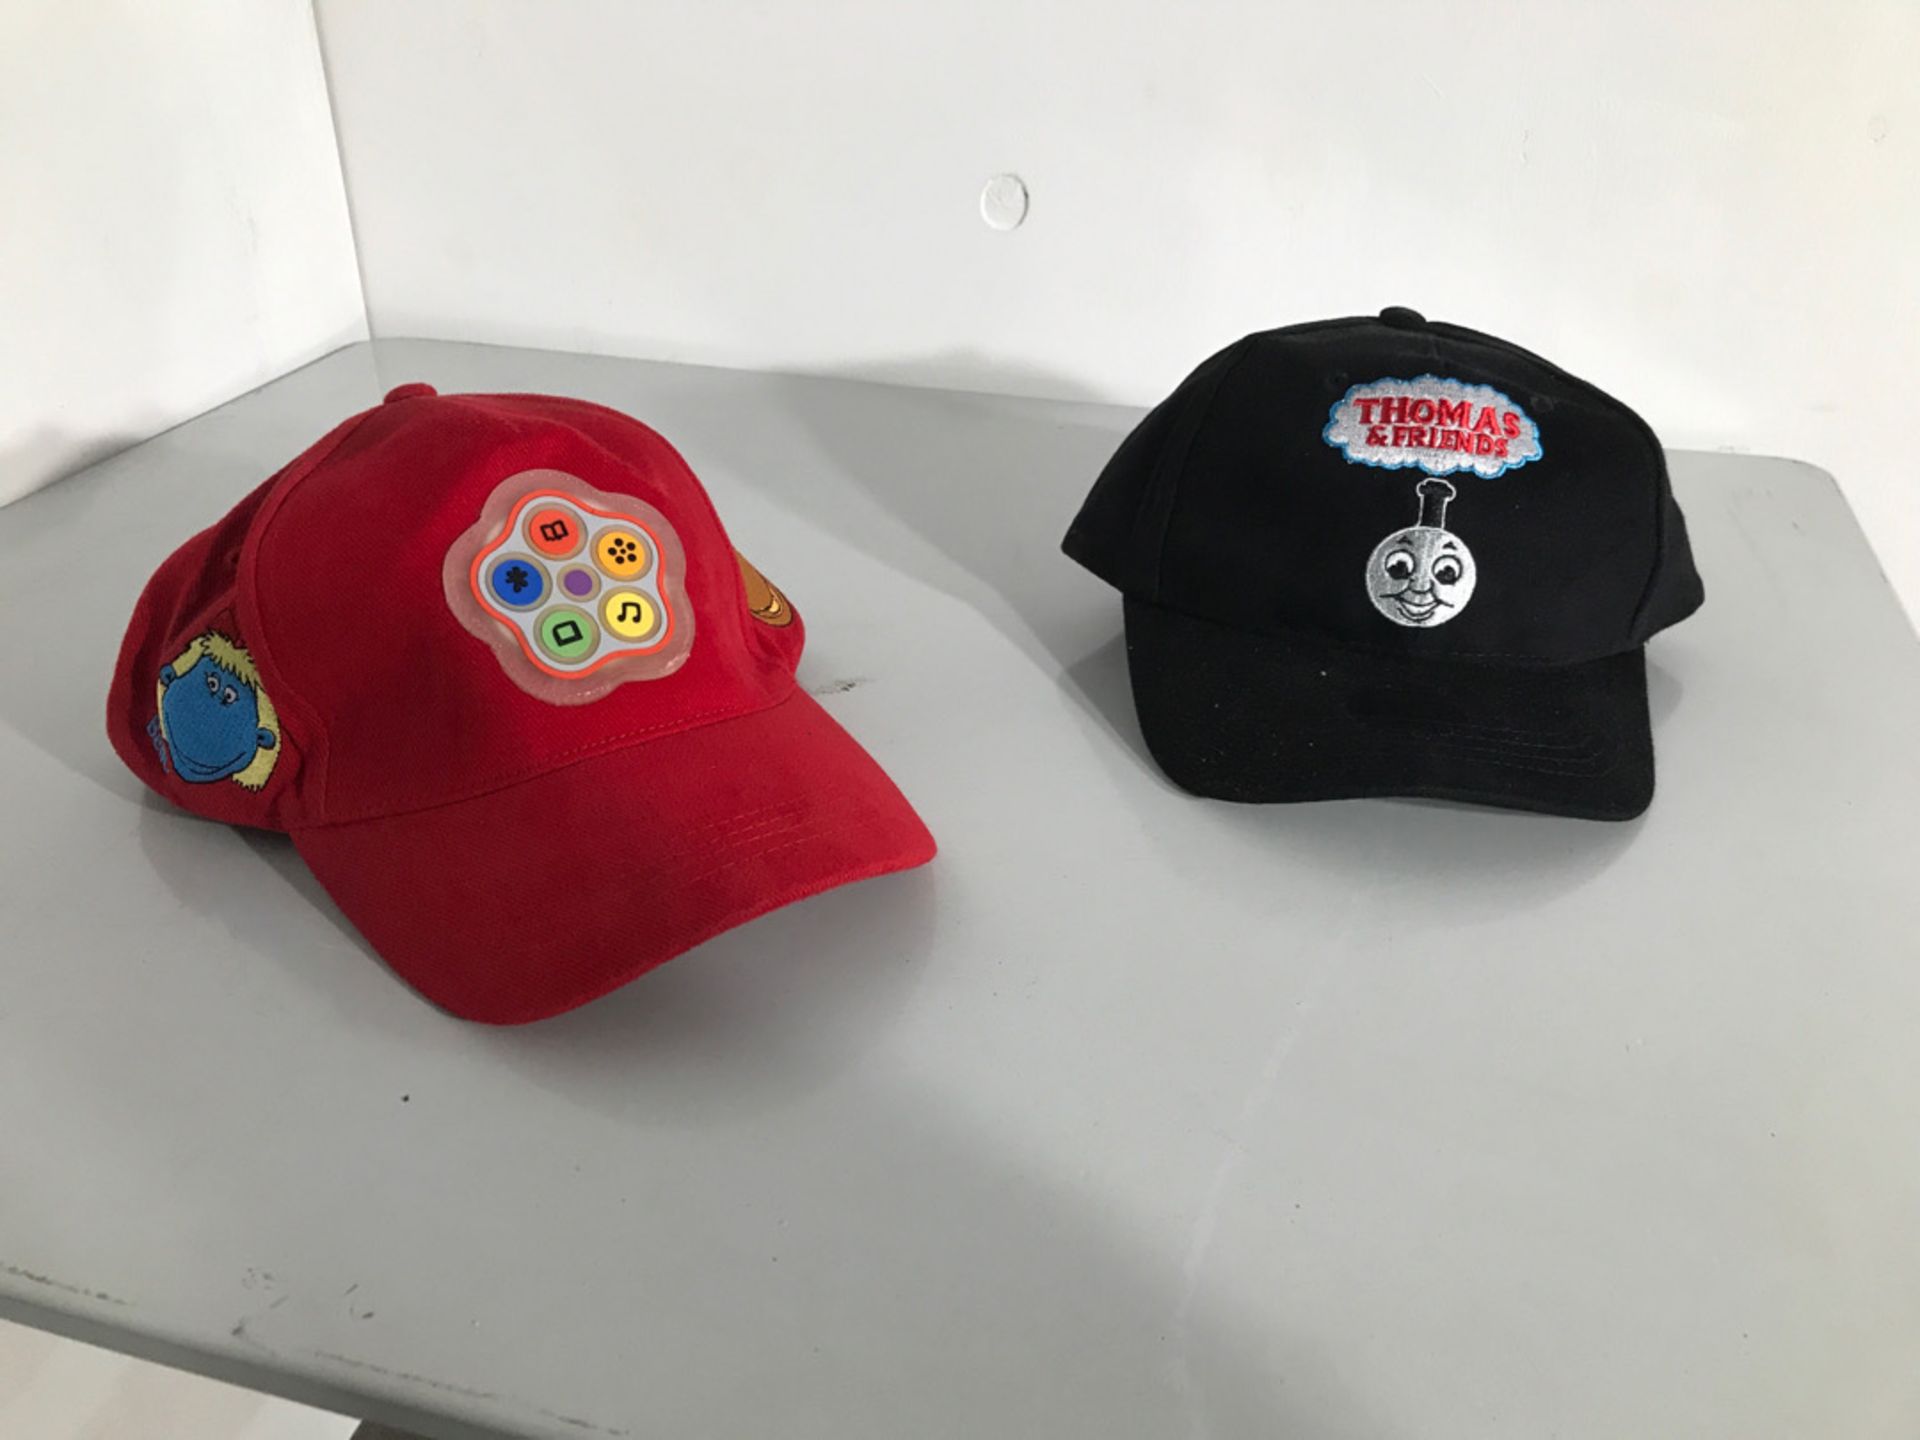 Red TWEENIES caps And Thomas the Tank Engine caps - Image 3 of 4